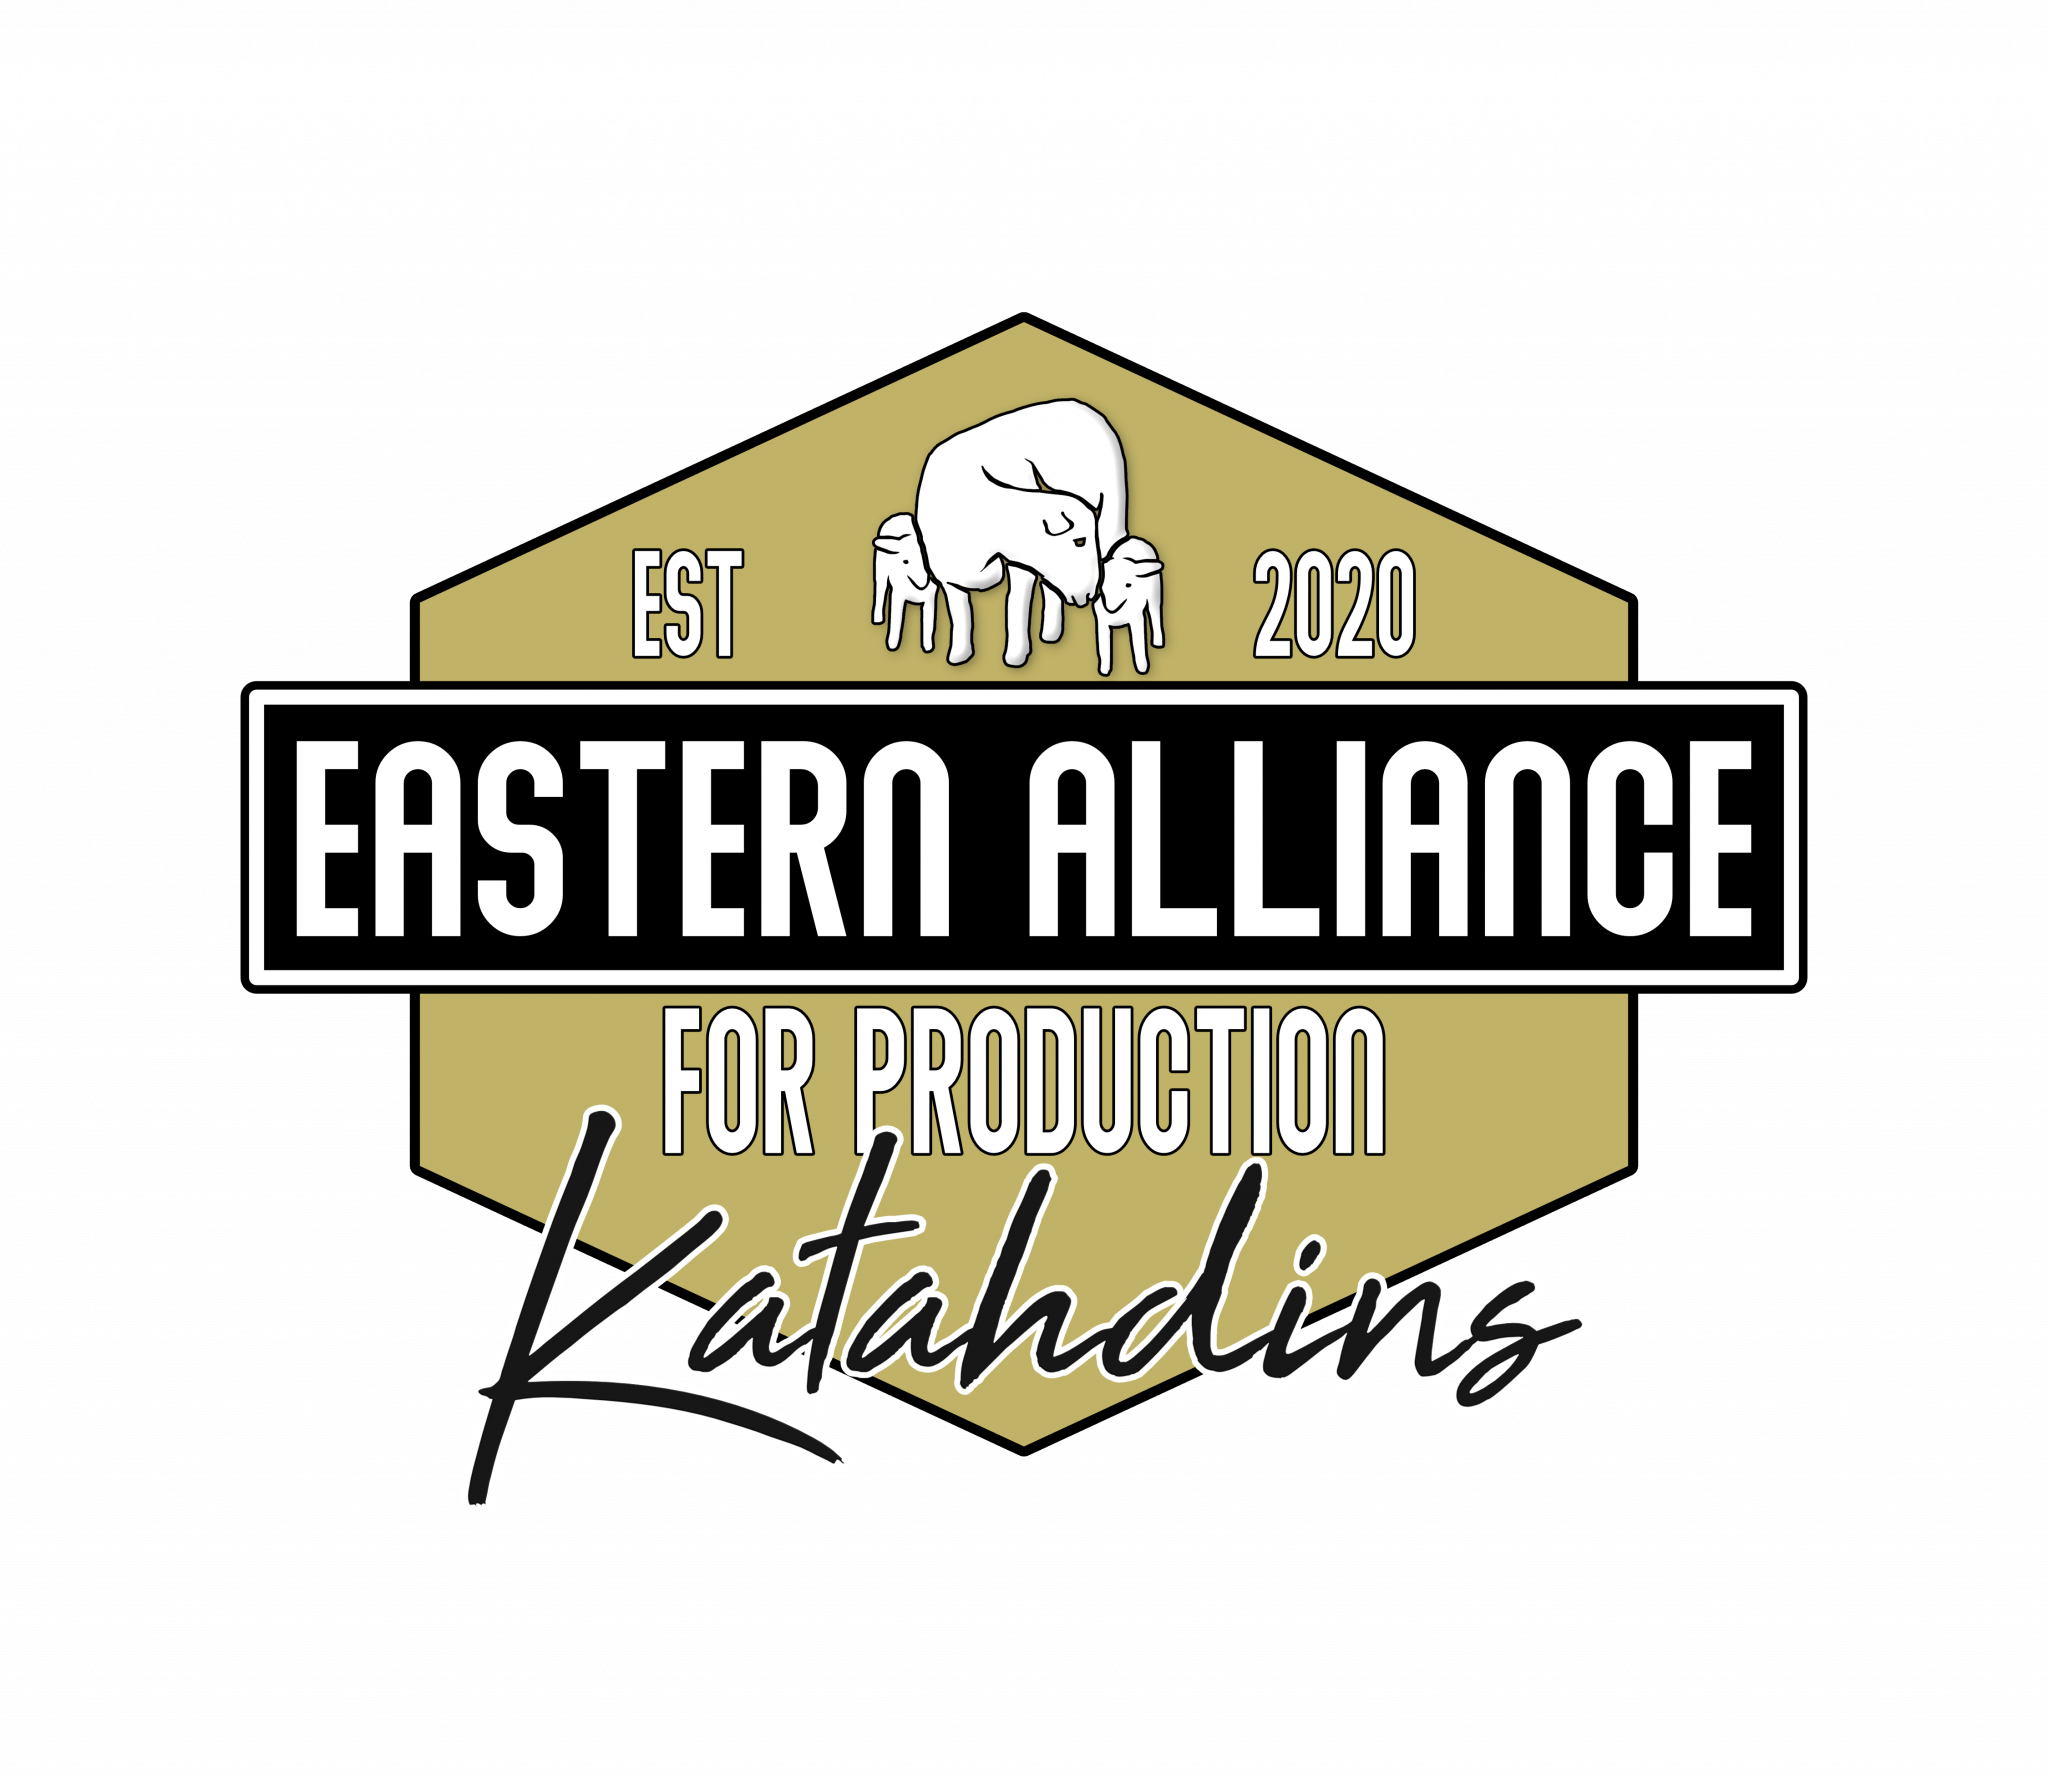 Payment Eastern Alliance for Production Katahdins